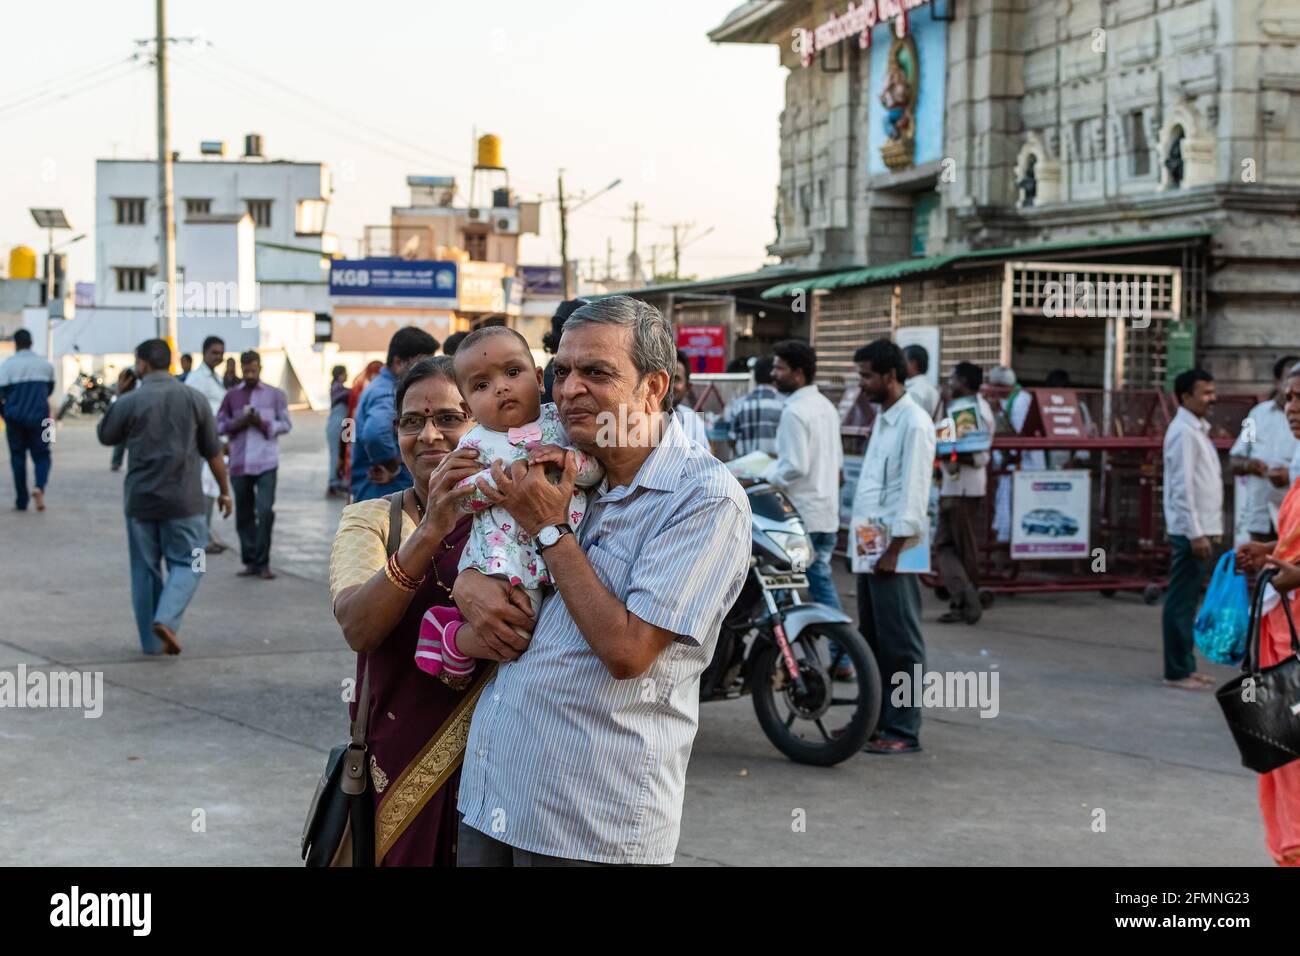 Mysore, Karnataka, India - January 2019: Two Indian grandparents holding a child and posing for a picture outside the ancient Chamundeshwari temple in Stock Photo